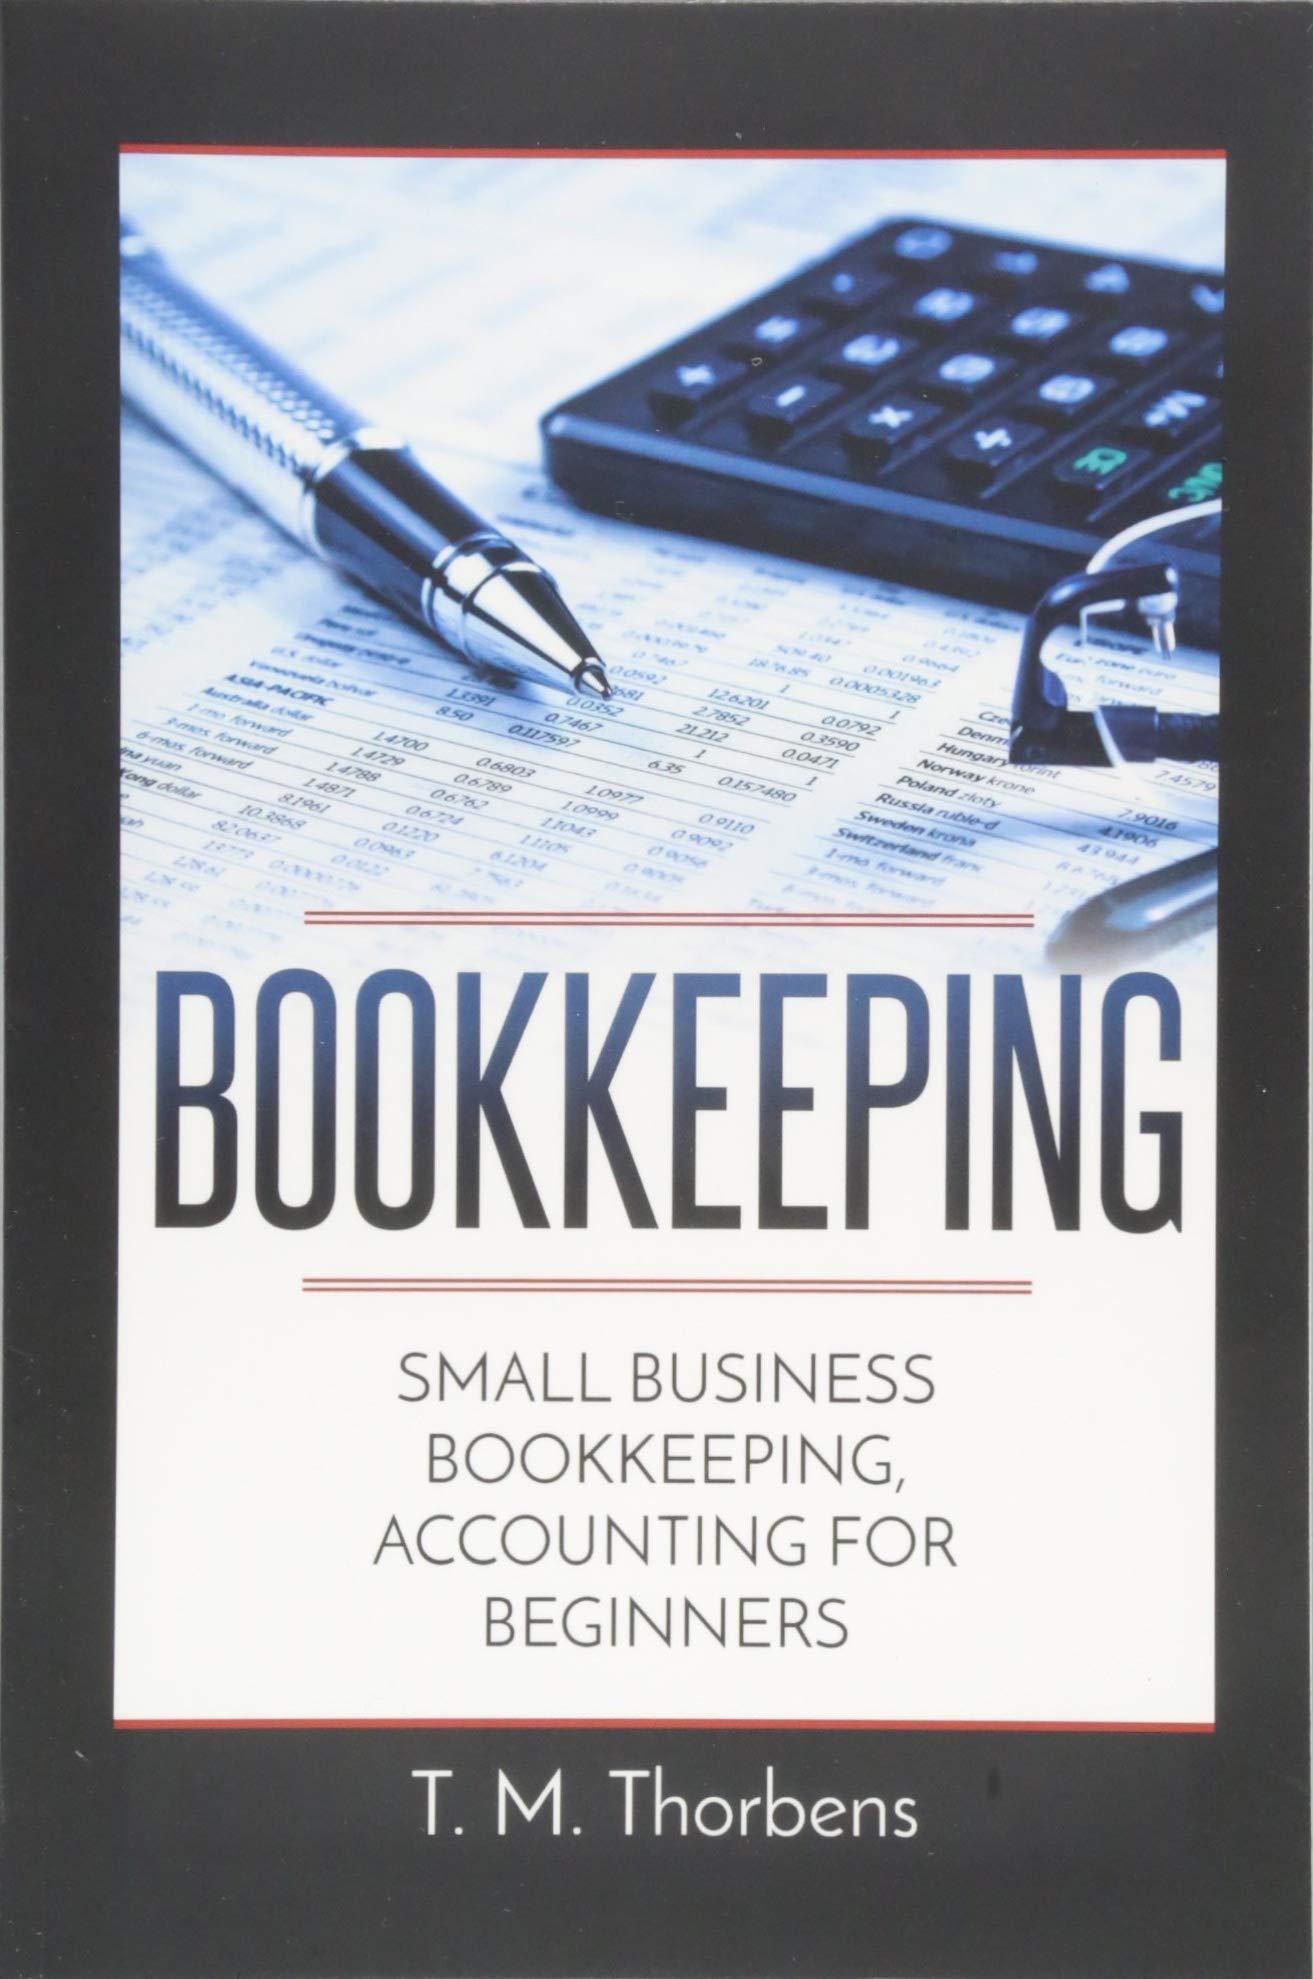 bookkeeping small business bookkeeping accounting for beginners 1st edition t. m. thorbens 1549566296,